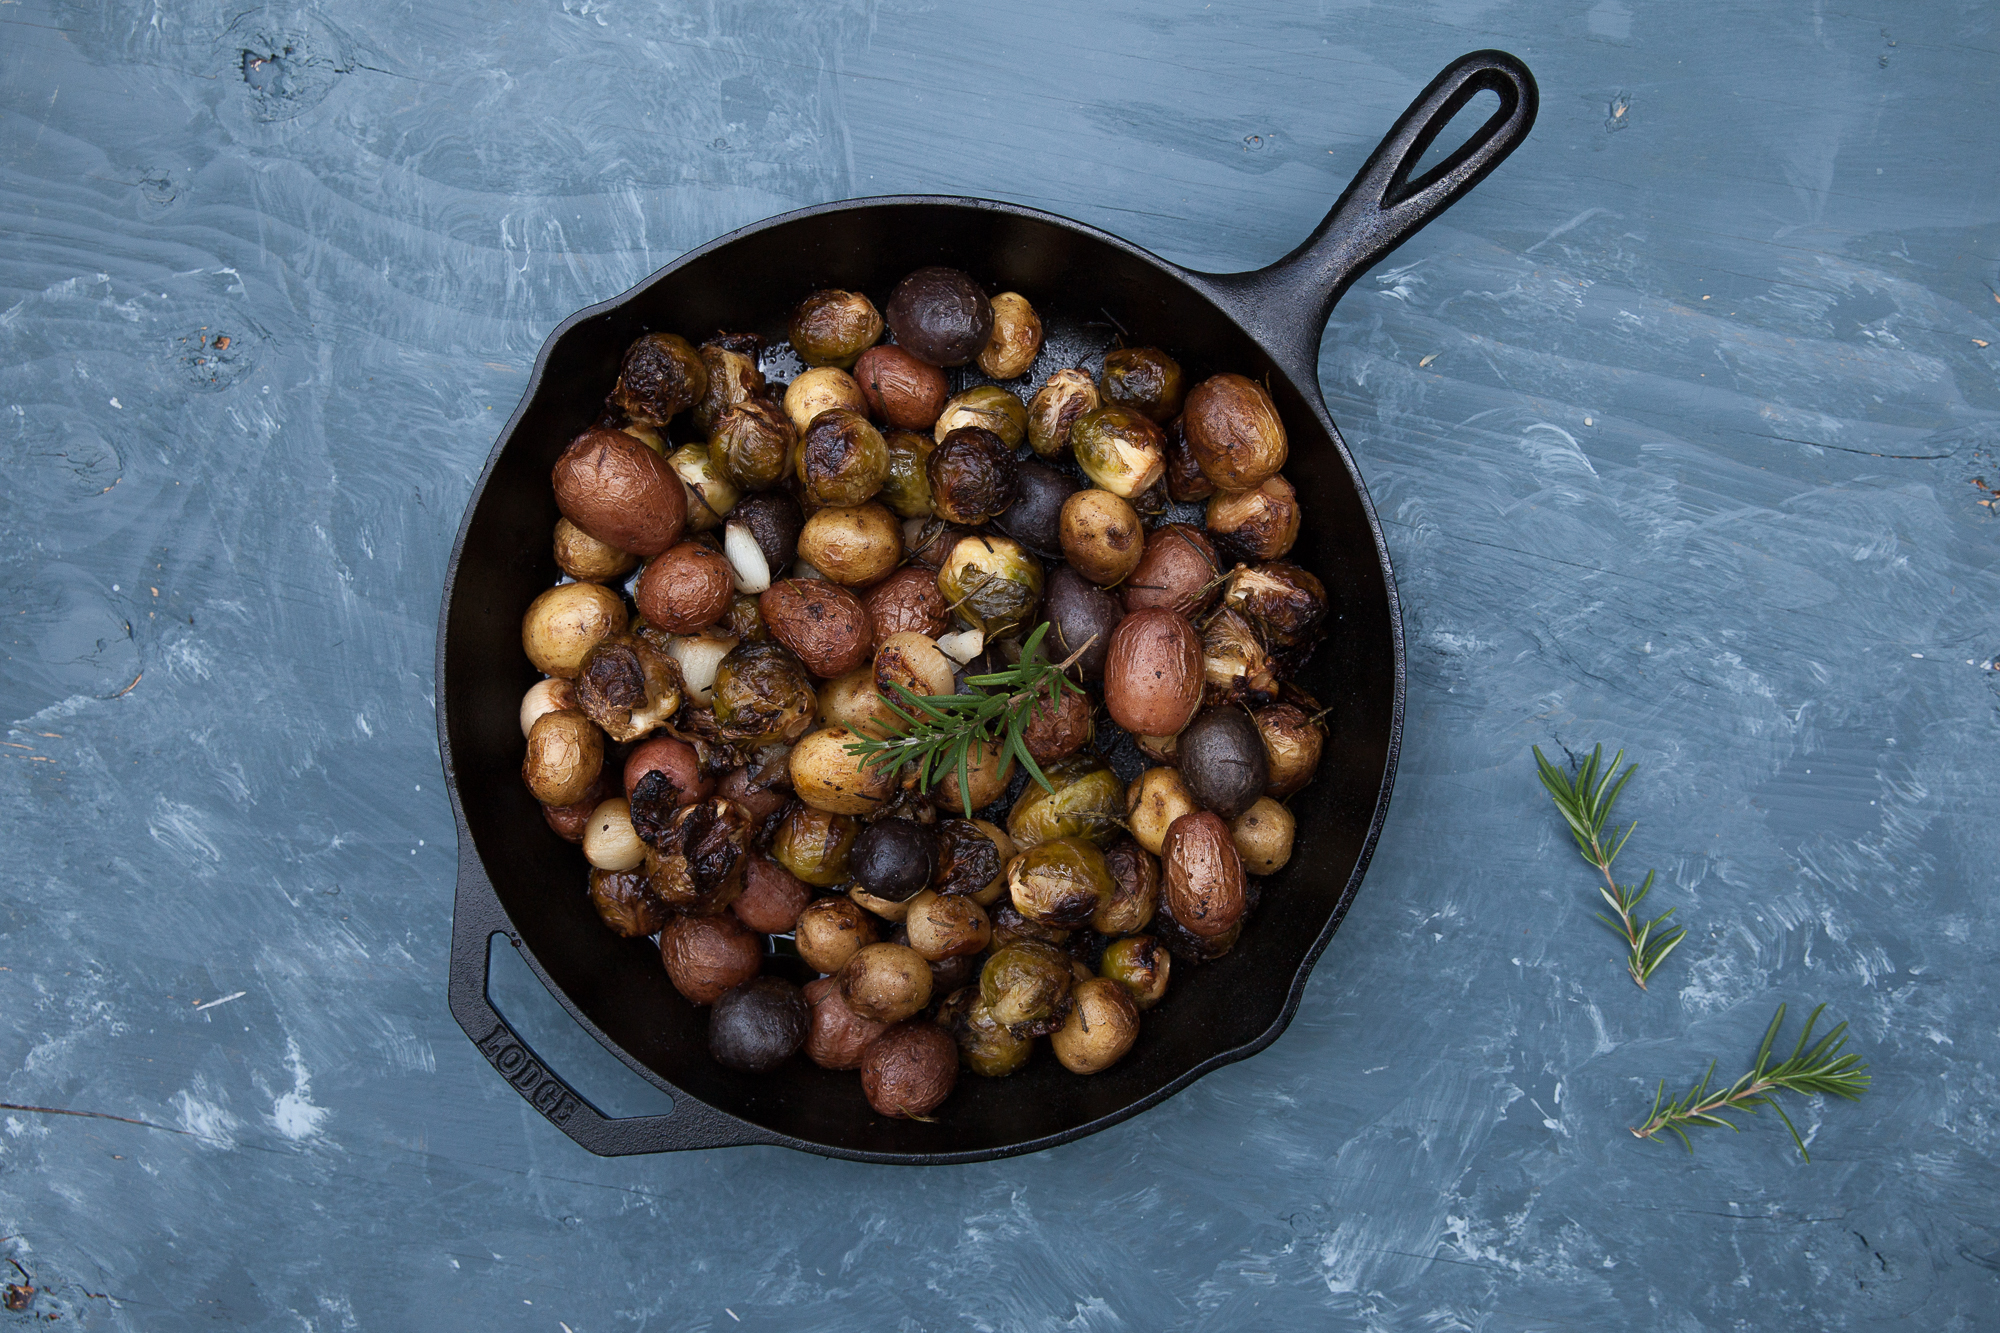 Skillet Roasted Potatoes with Brussel Sprouts